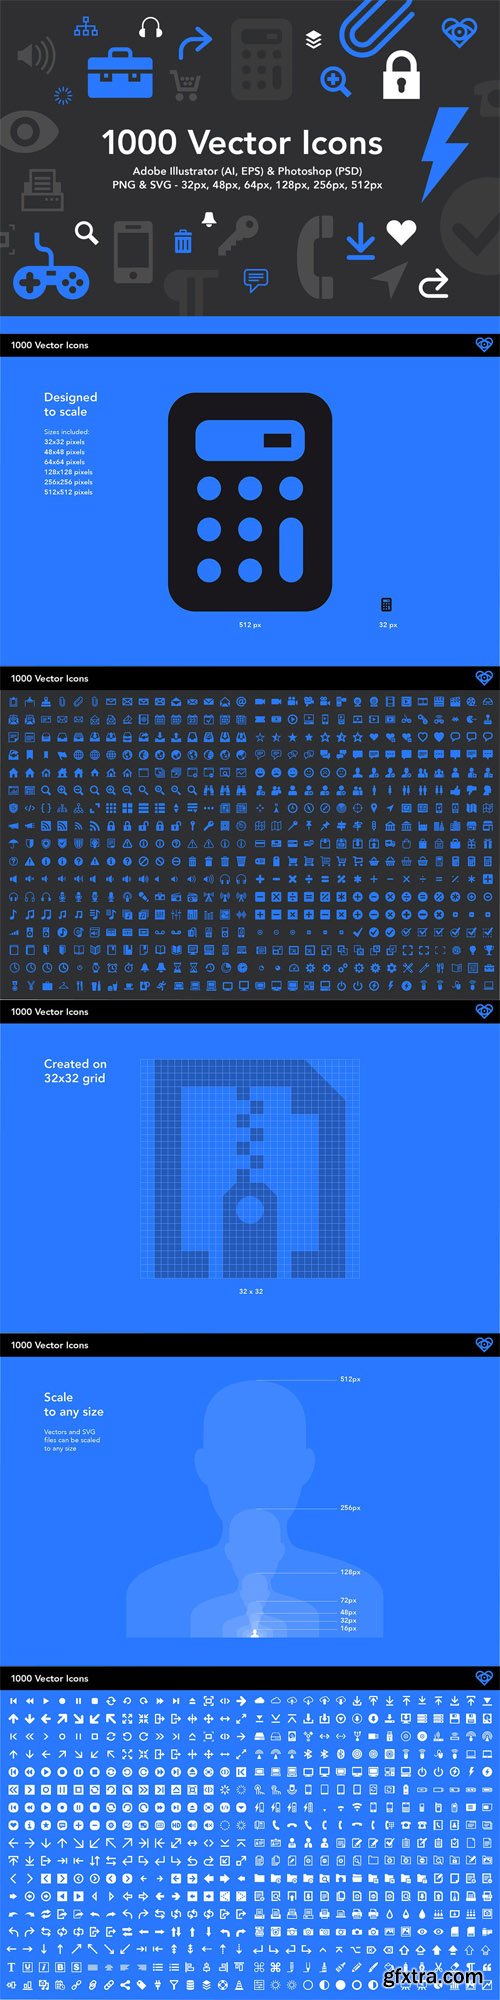 1000 Vector Icons